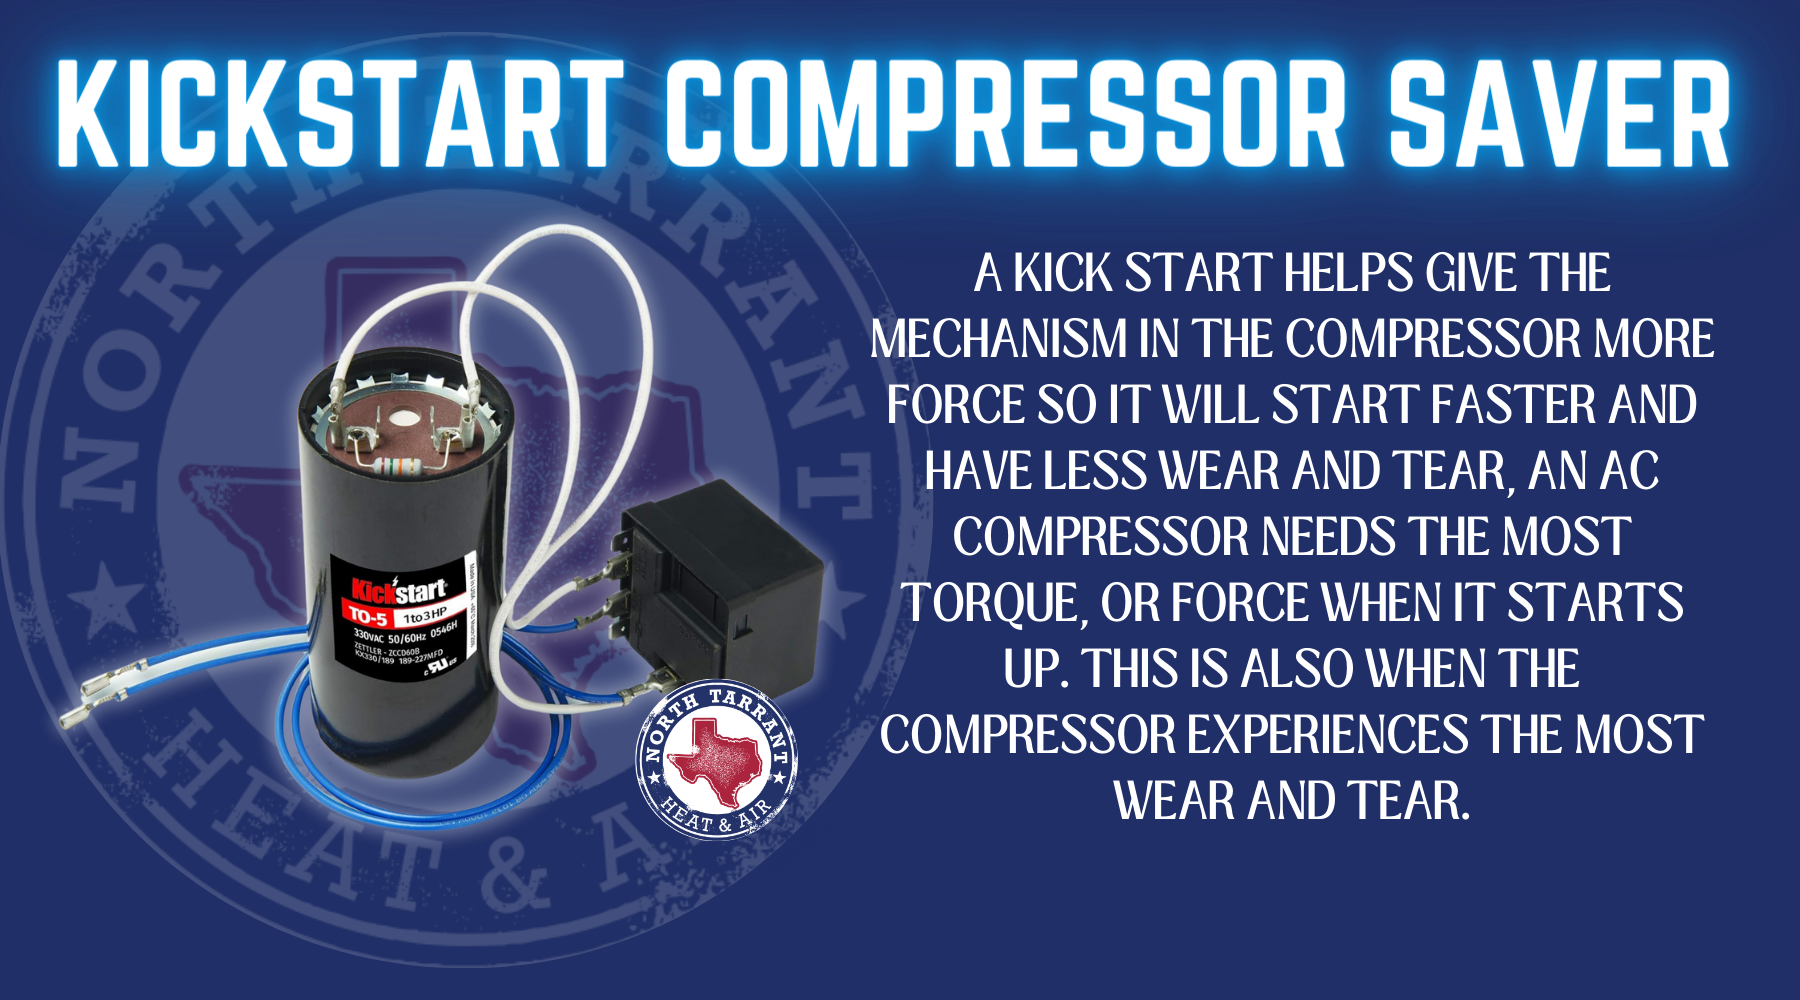 A kick start helpS give the mechanism in the compressor more force so it will start faster and have less wear and tear, AN AC COMPRESSOR needs the most torque, or force when it starts up. This is also when the compressor experiences the most wear and tear.